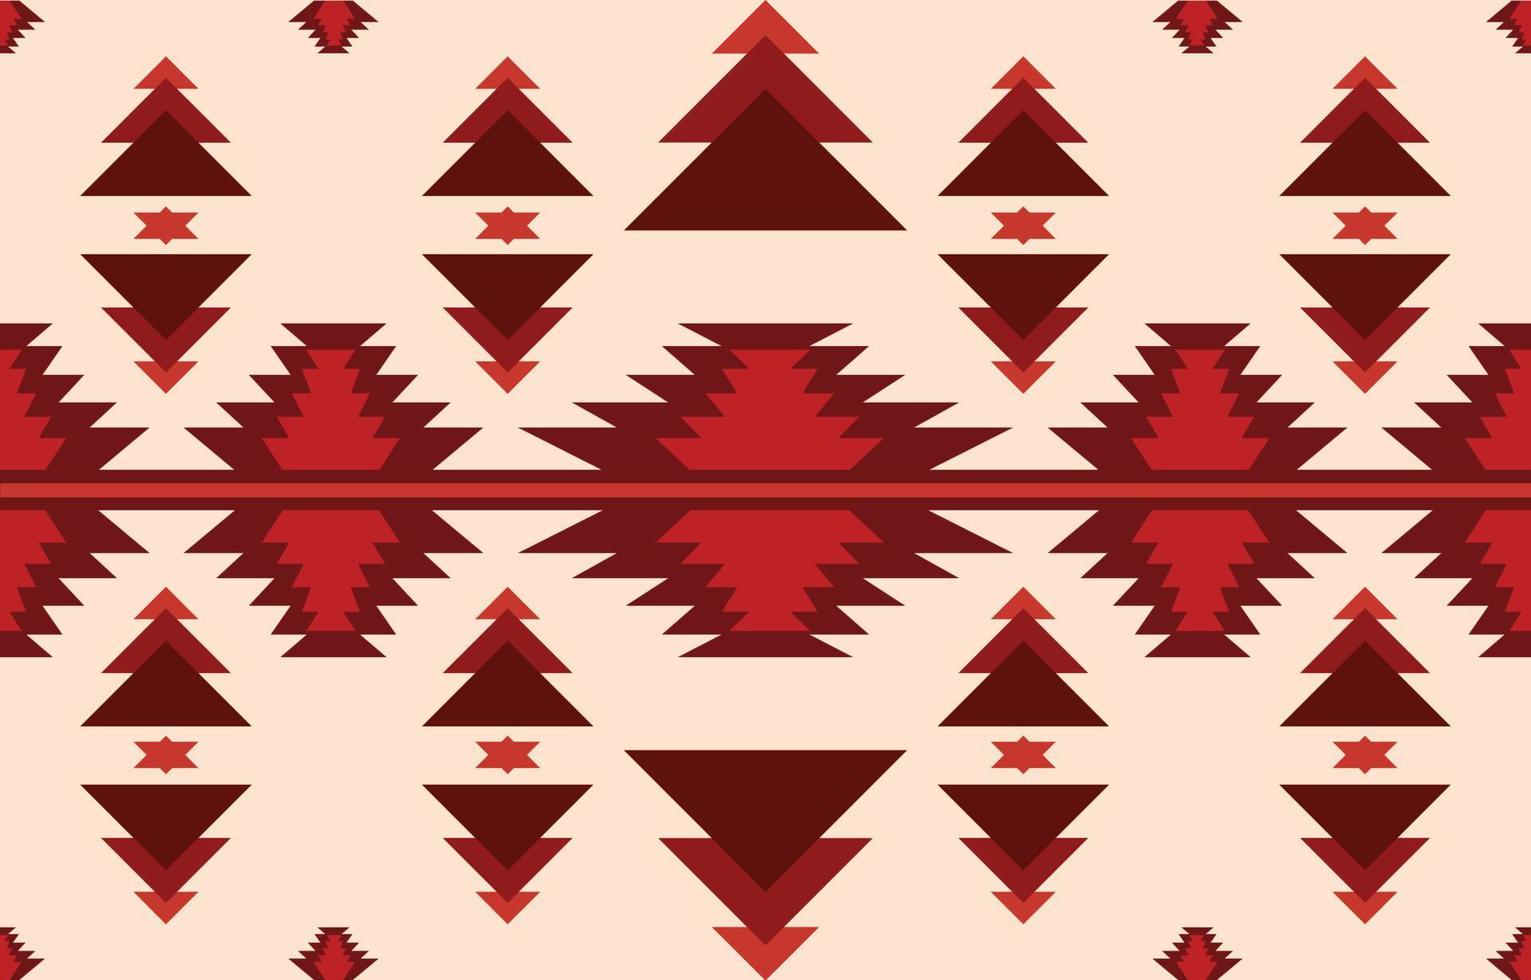 Abstract american ethnic geometric pattern design for background or wallpaper. fabric pattern vector illustration